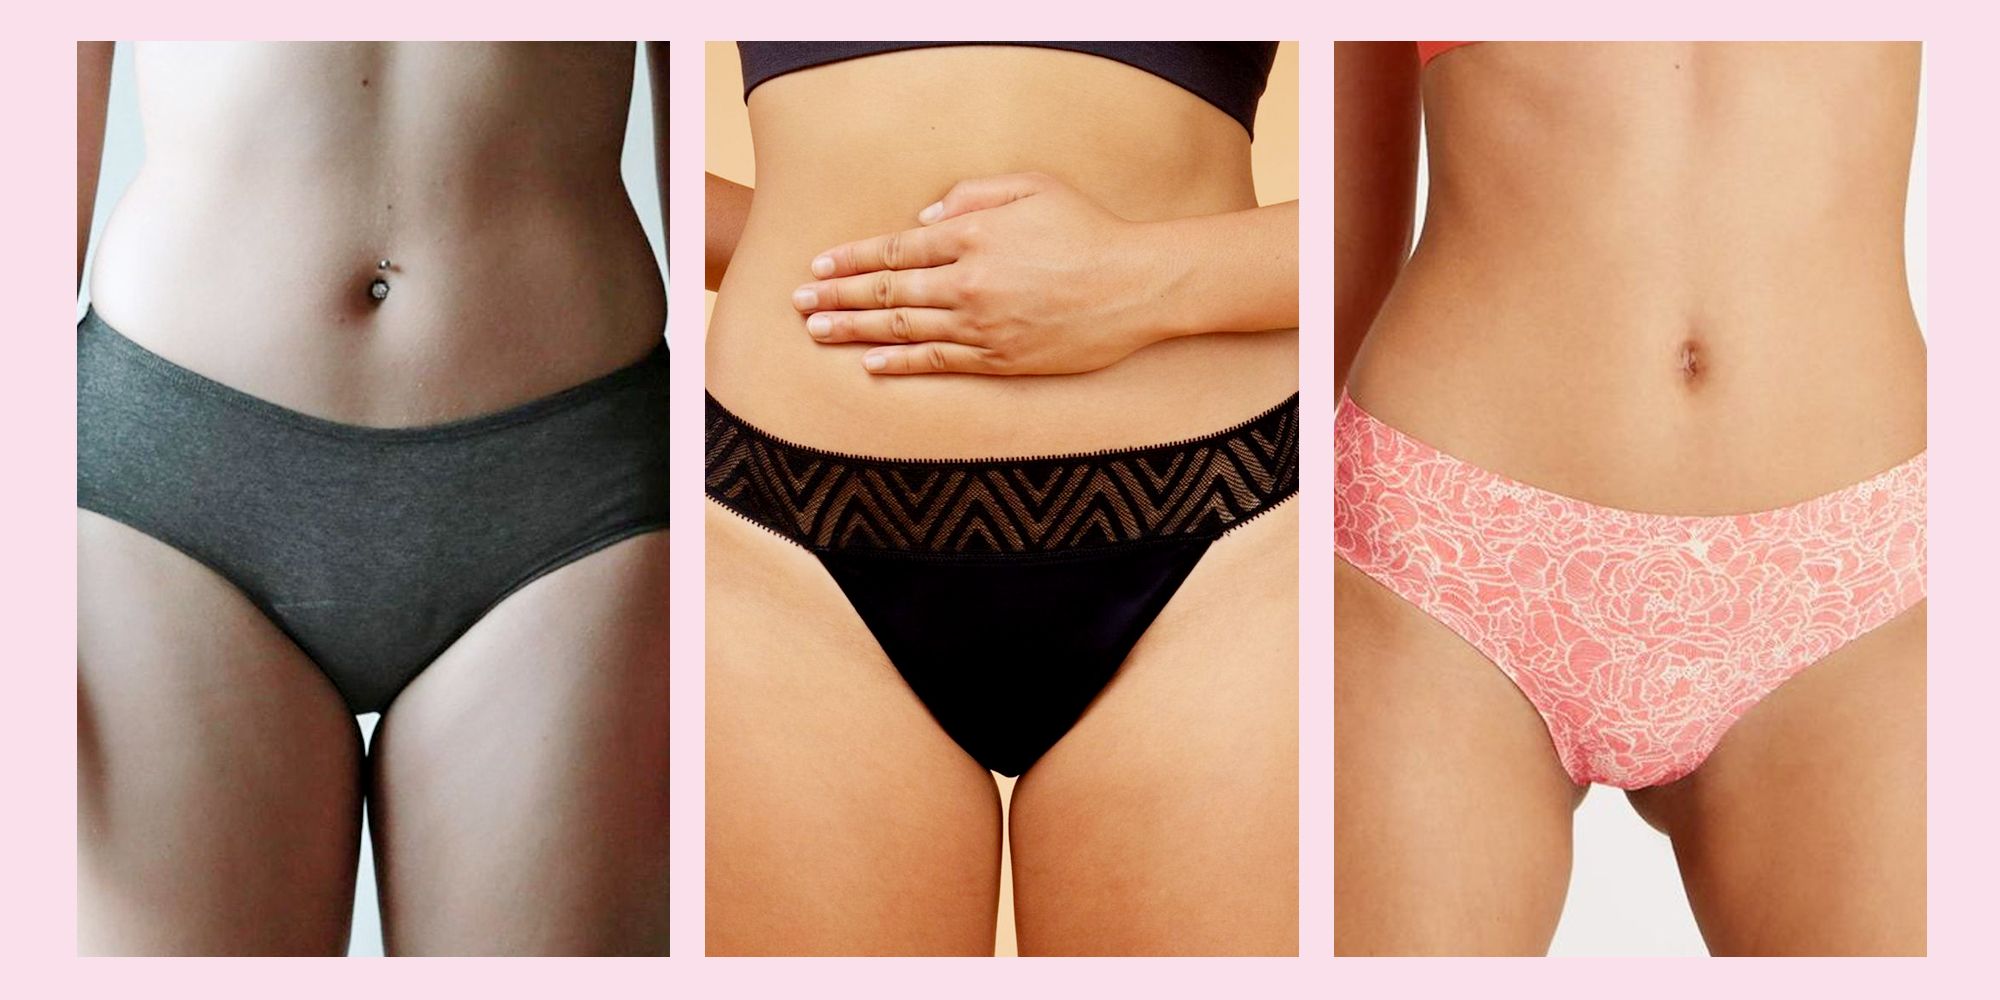 How To Find the Best Period Underwear for You